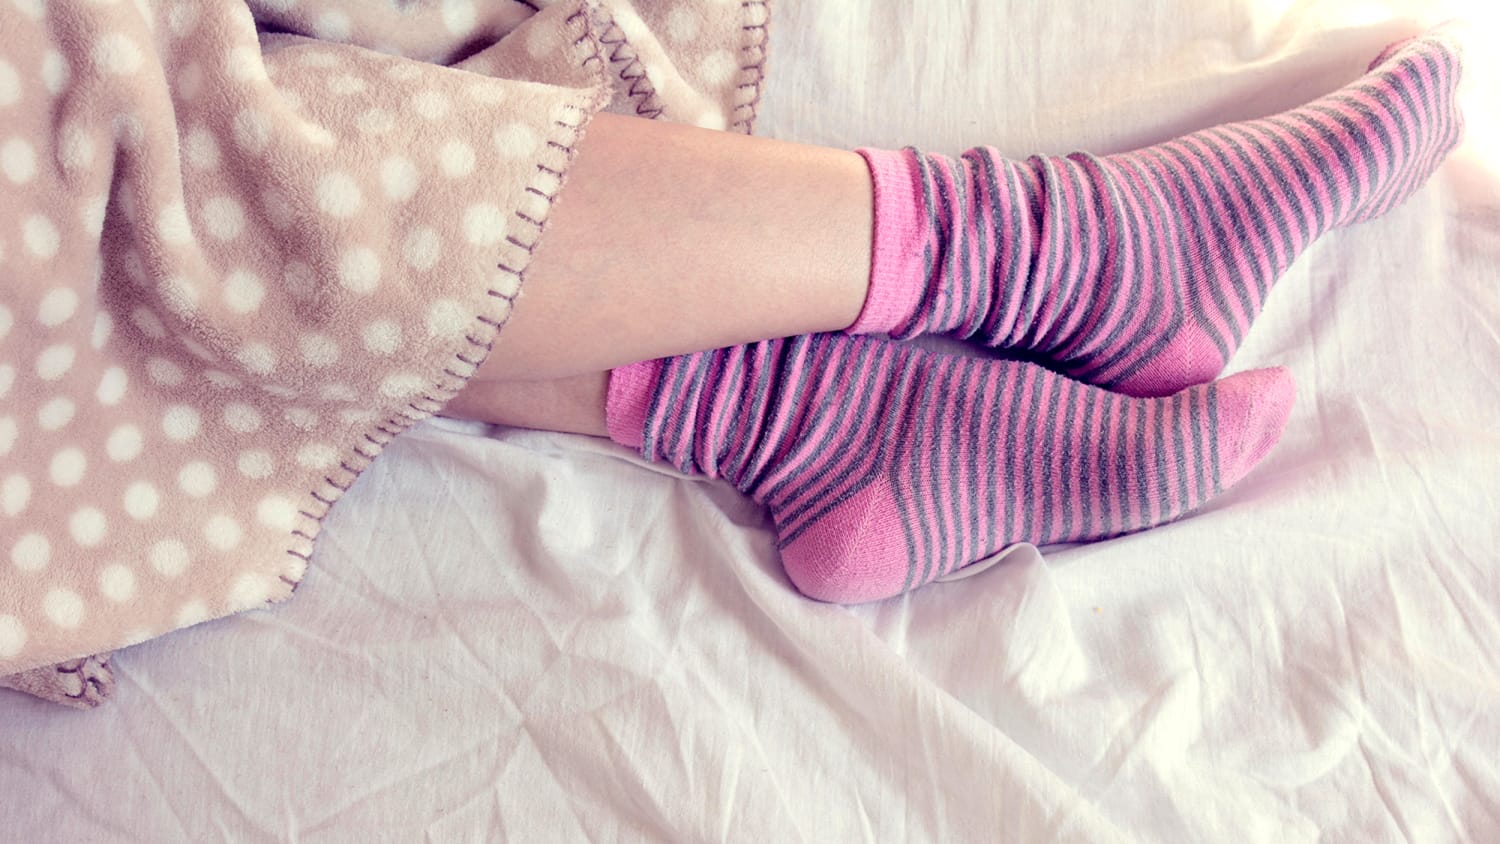 Wearing socks to bed is OK, and actually good for you